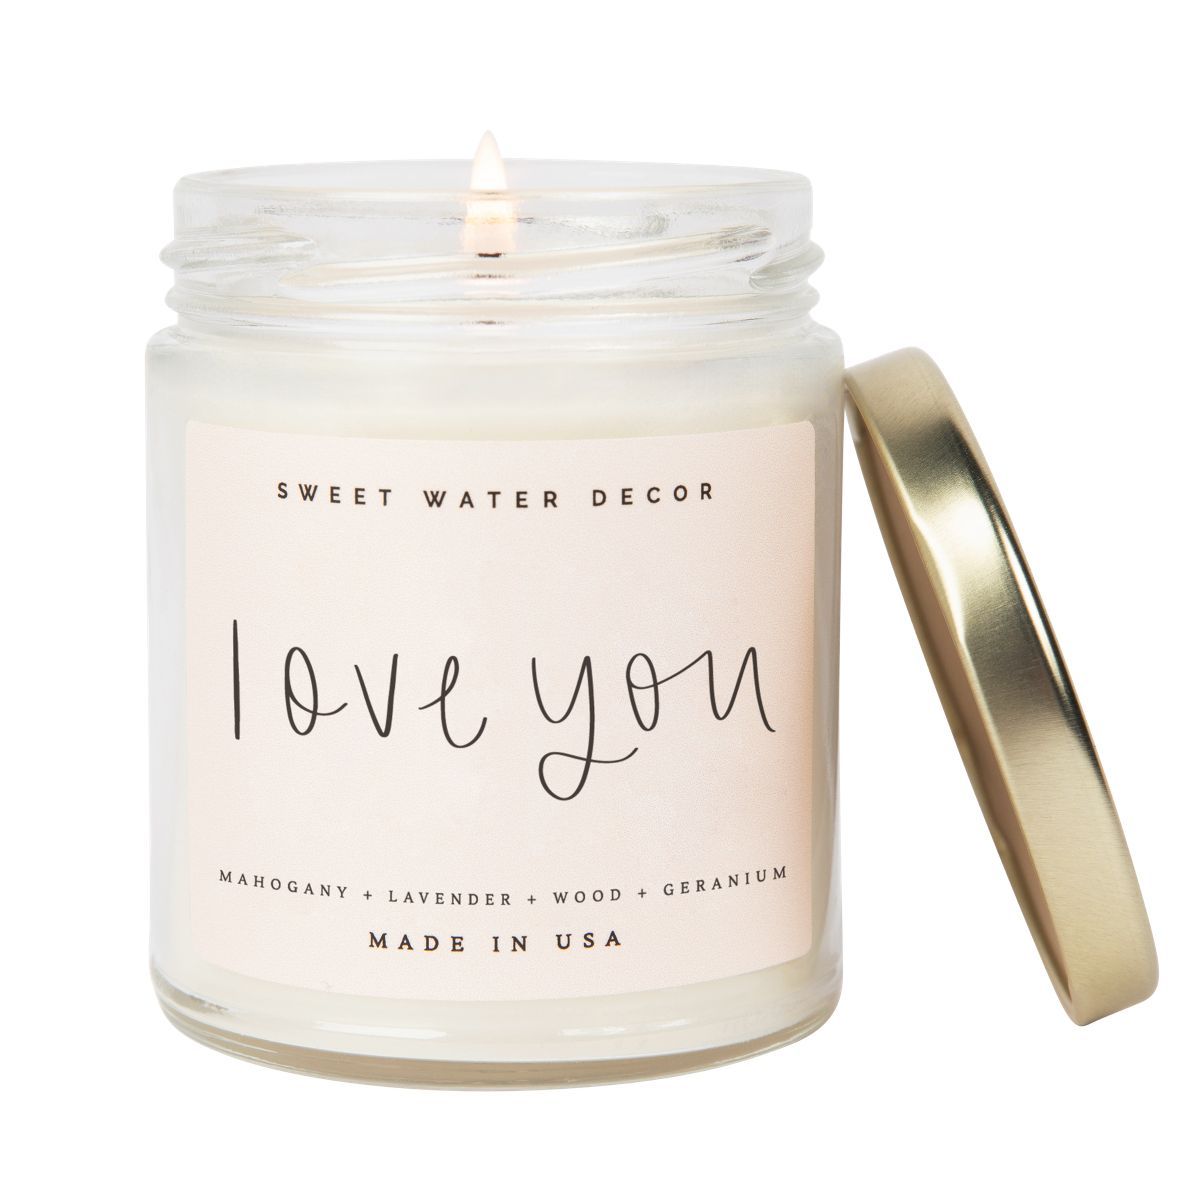 Sweet Water Decor Love You 9oz Clear Jar Soy Candle | Target